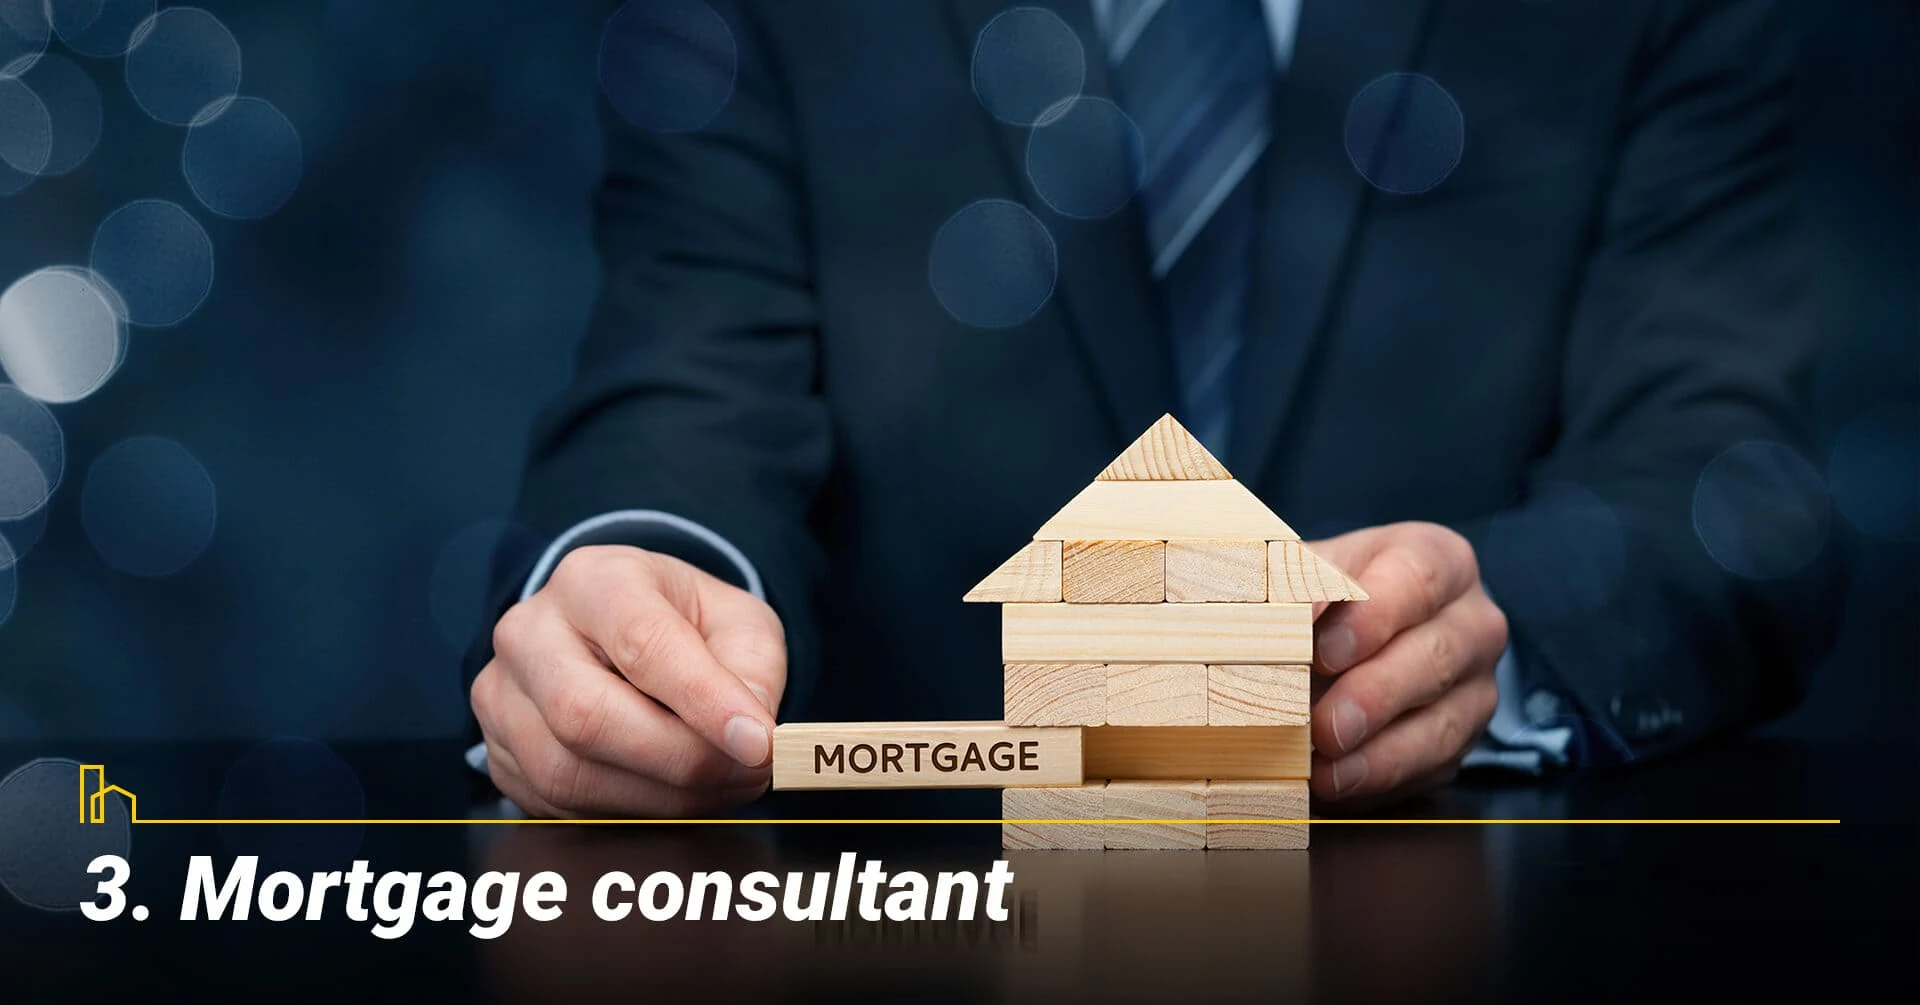 Mortgage consultant, Consult with your mortgage advisor